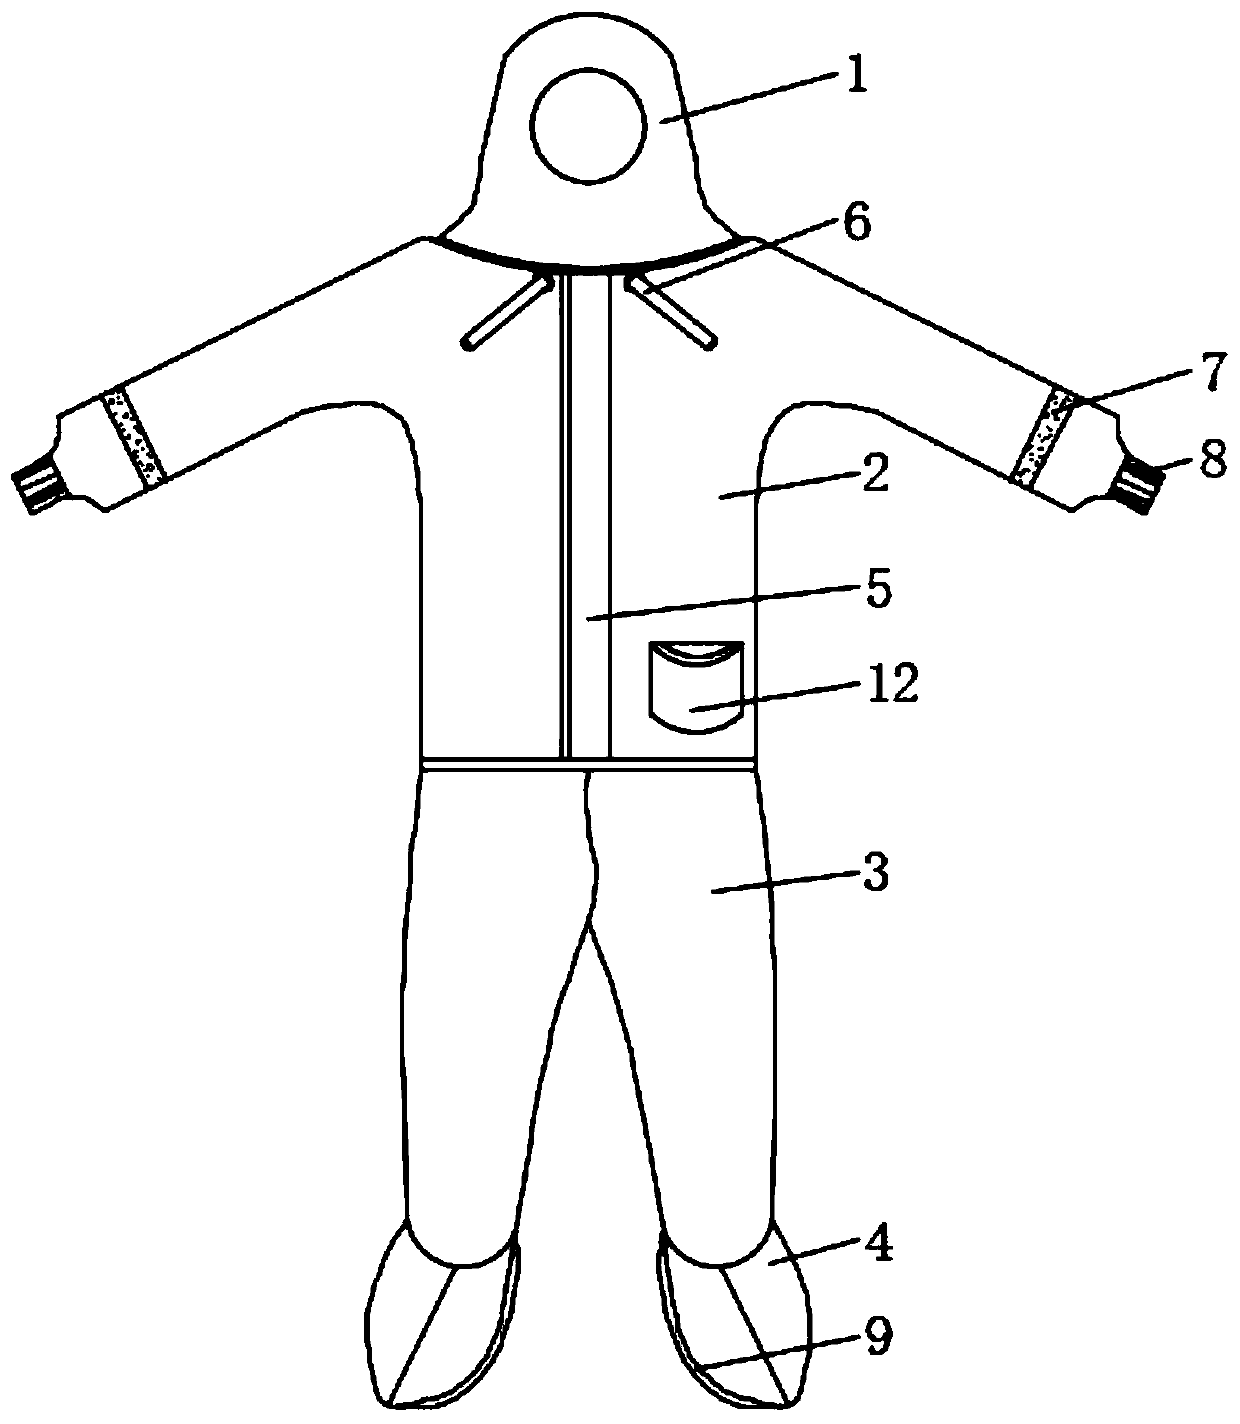 Disposable protective garment with improved adhesive tape and drawstrings